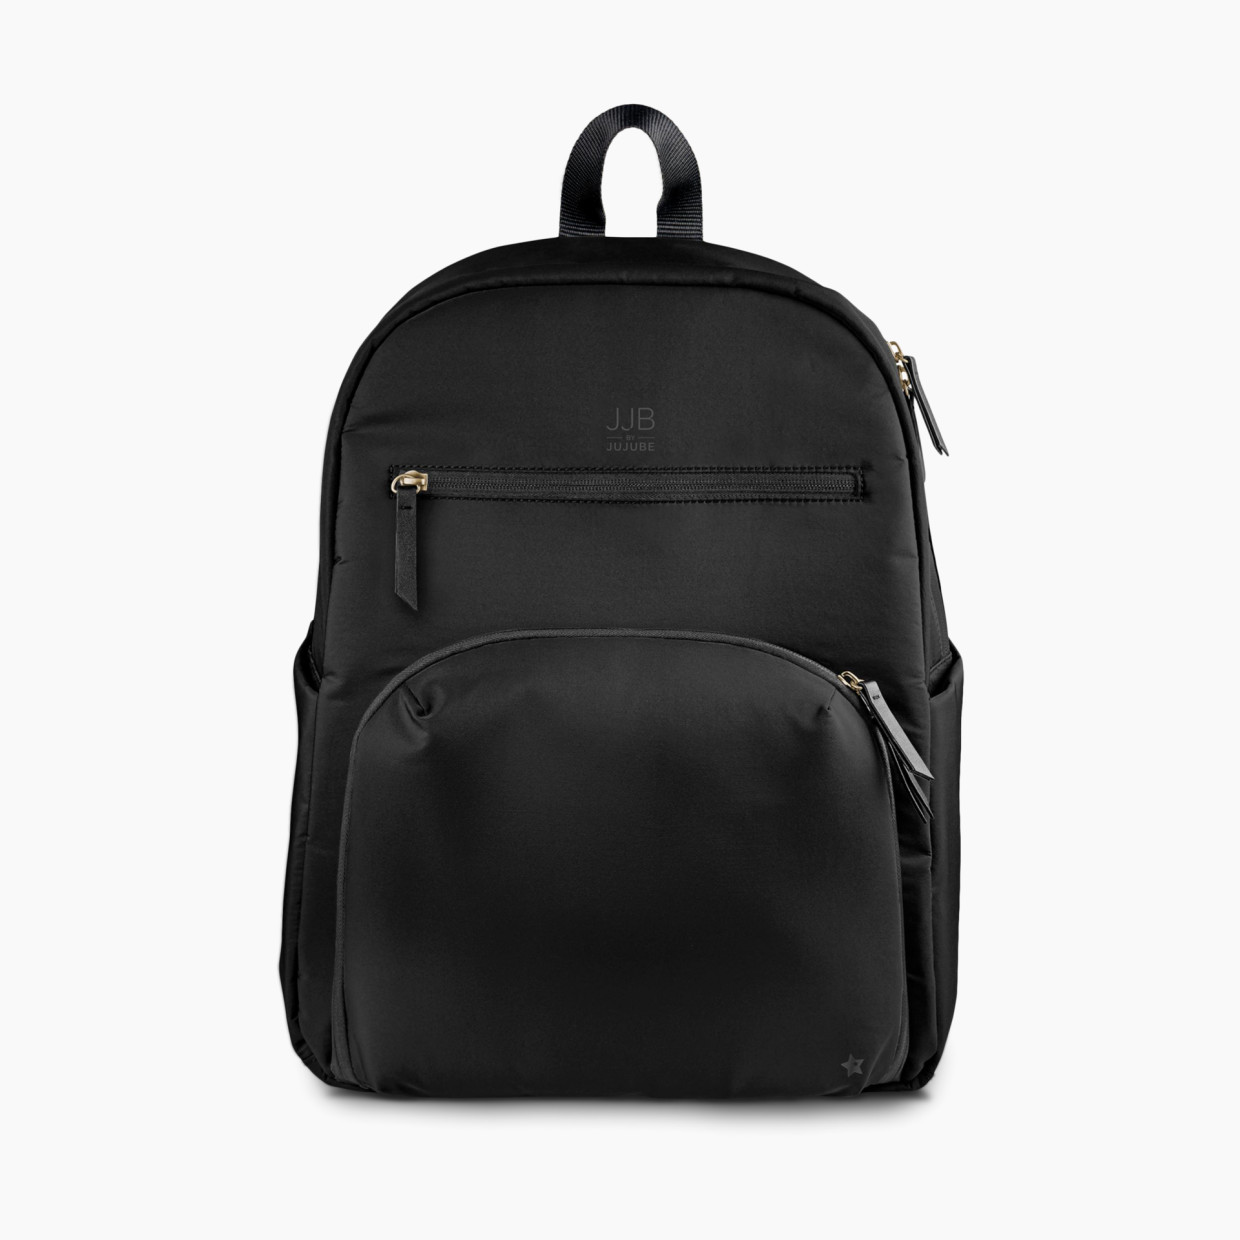 JUJUBE The Deluxe Diaper Backpack - Black.